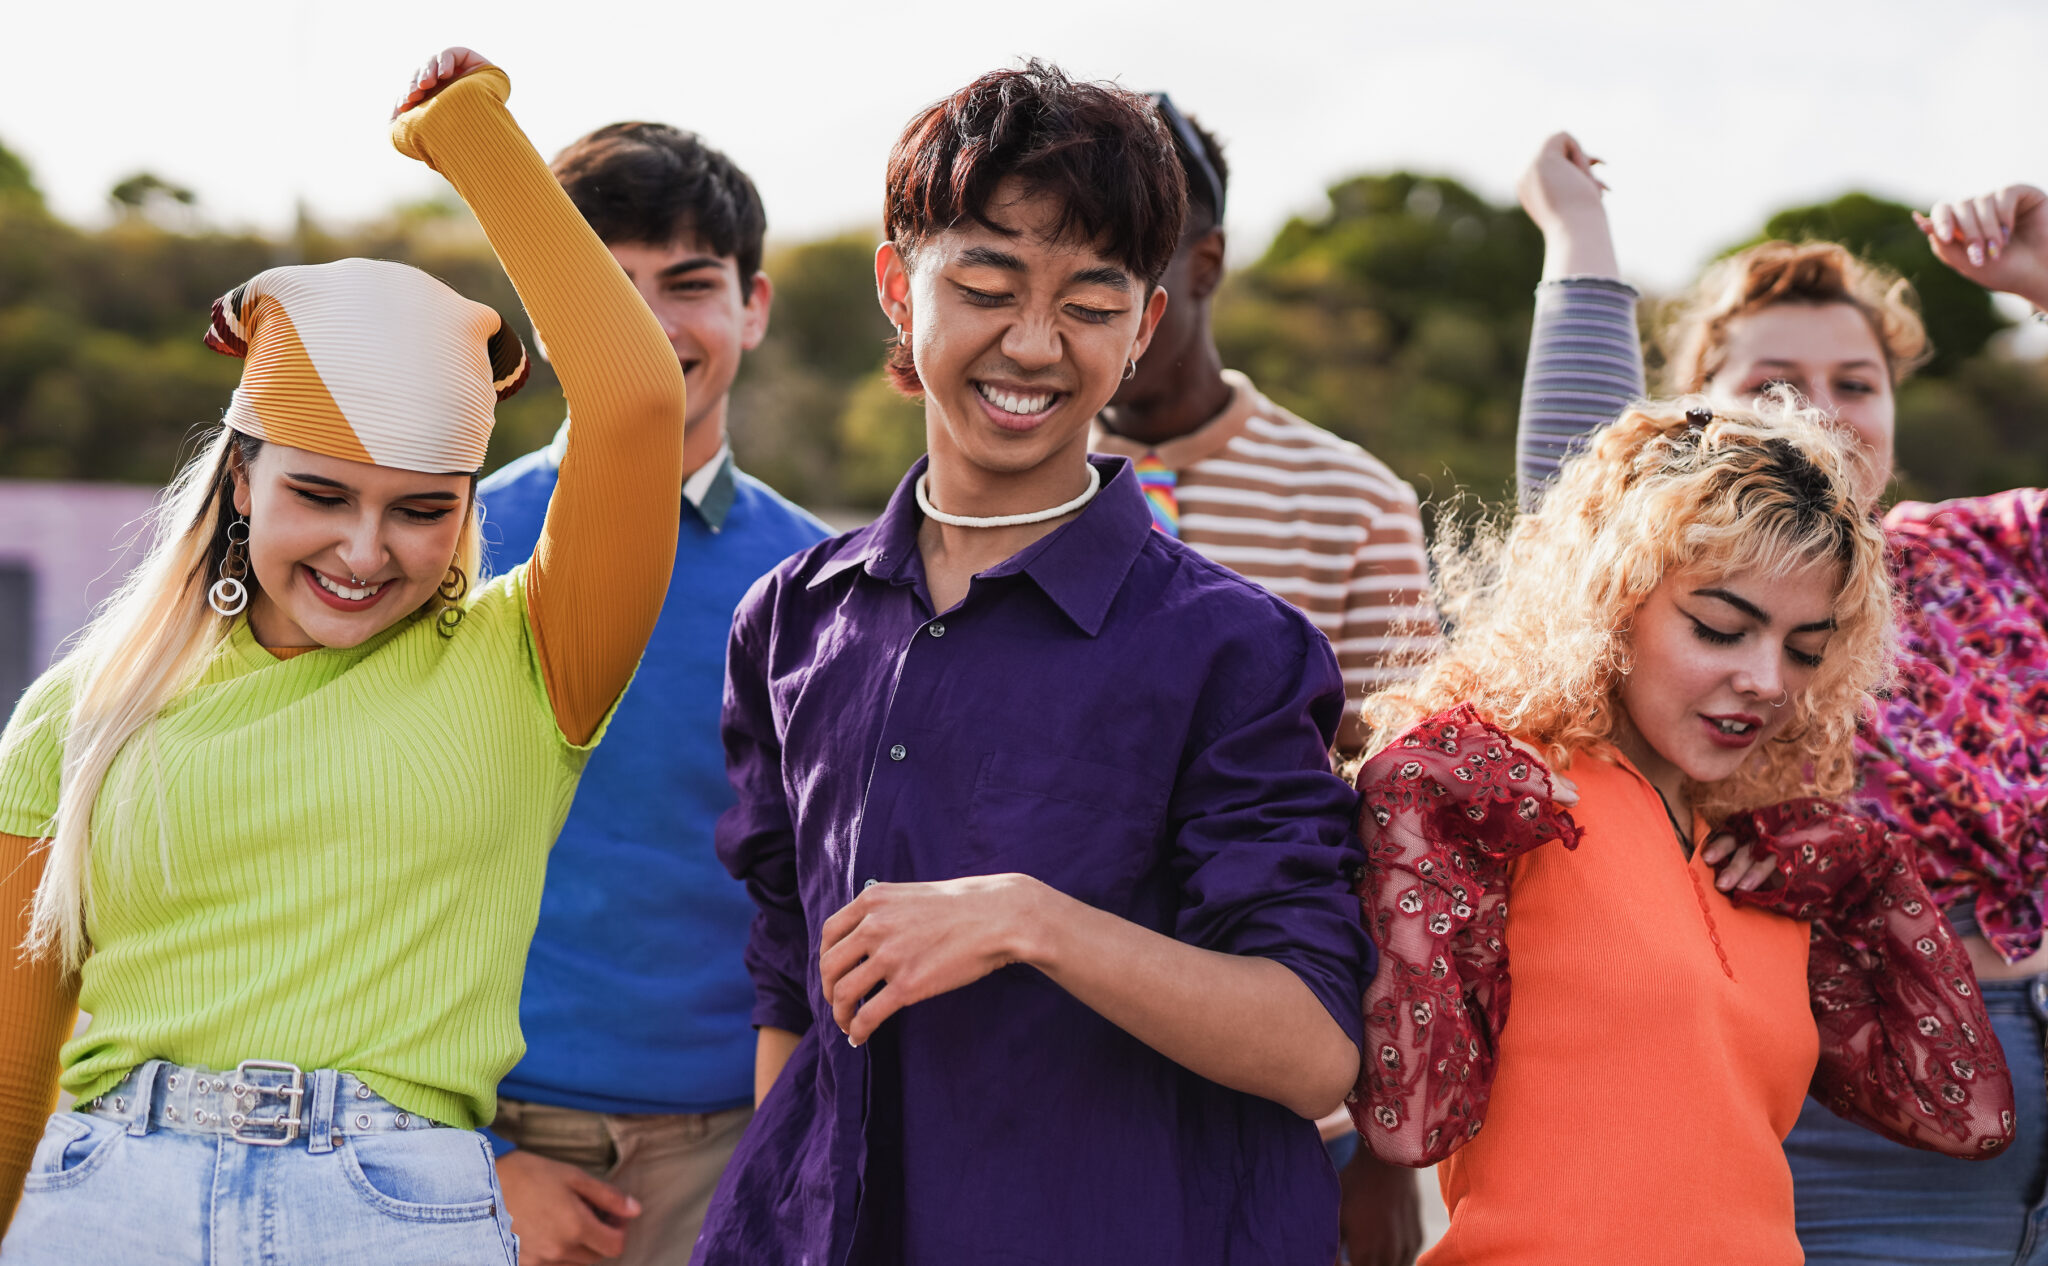 Group of diverse young people dancing outdoor - Summer concert and multiracial friends concept